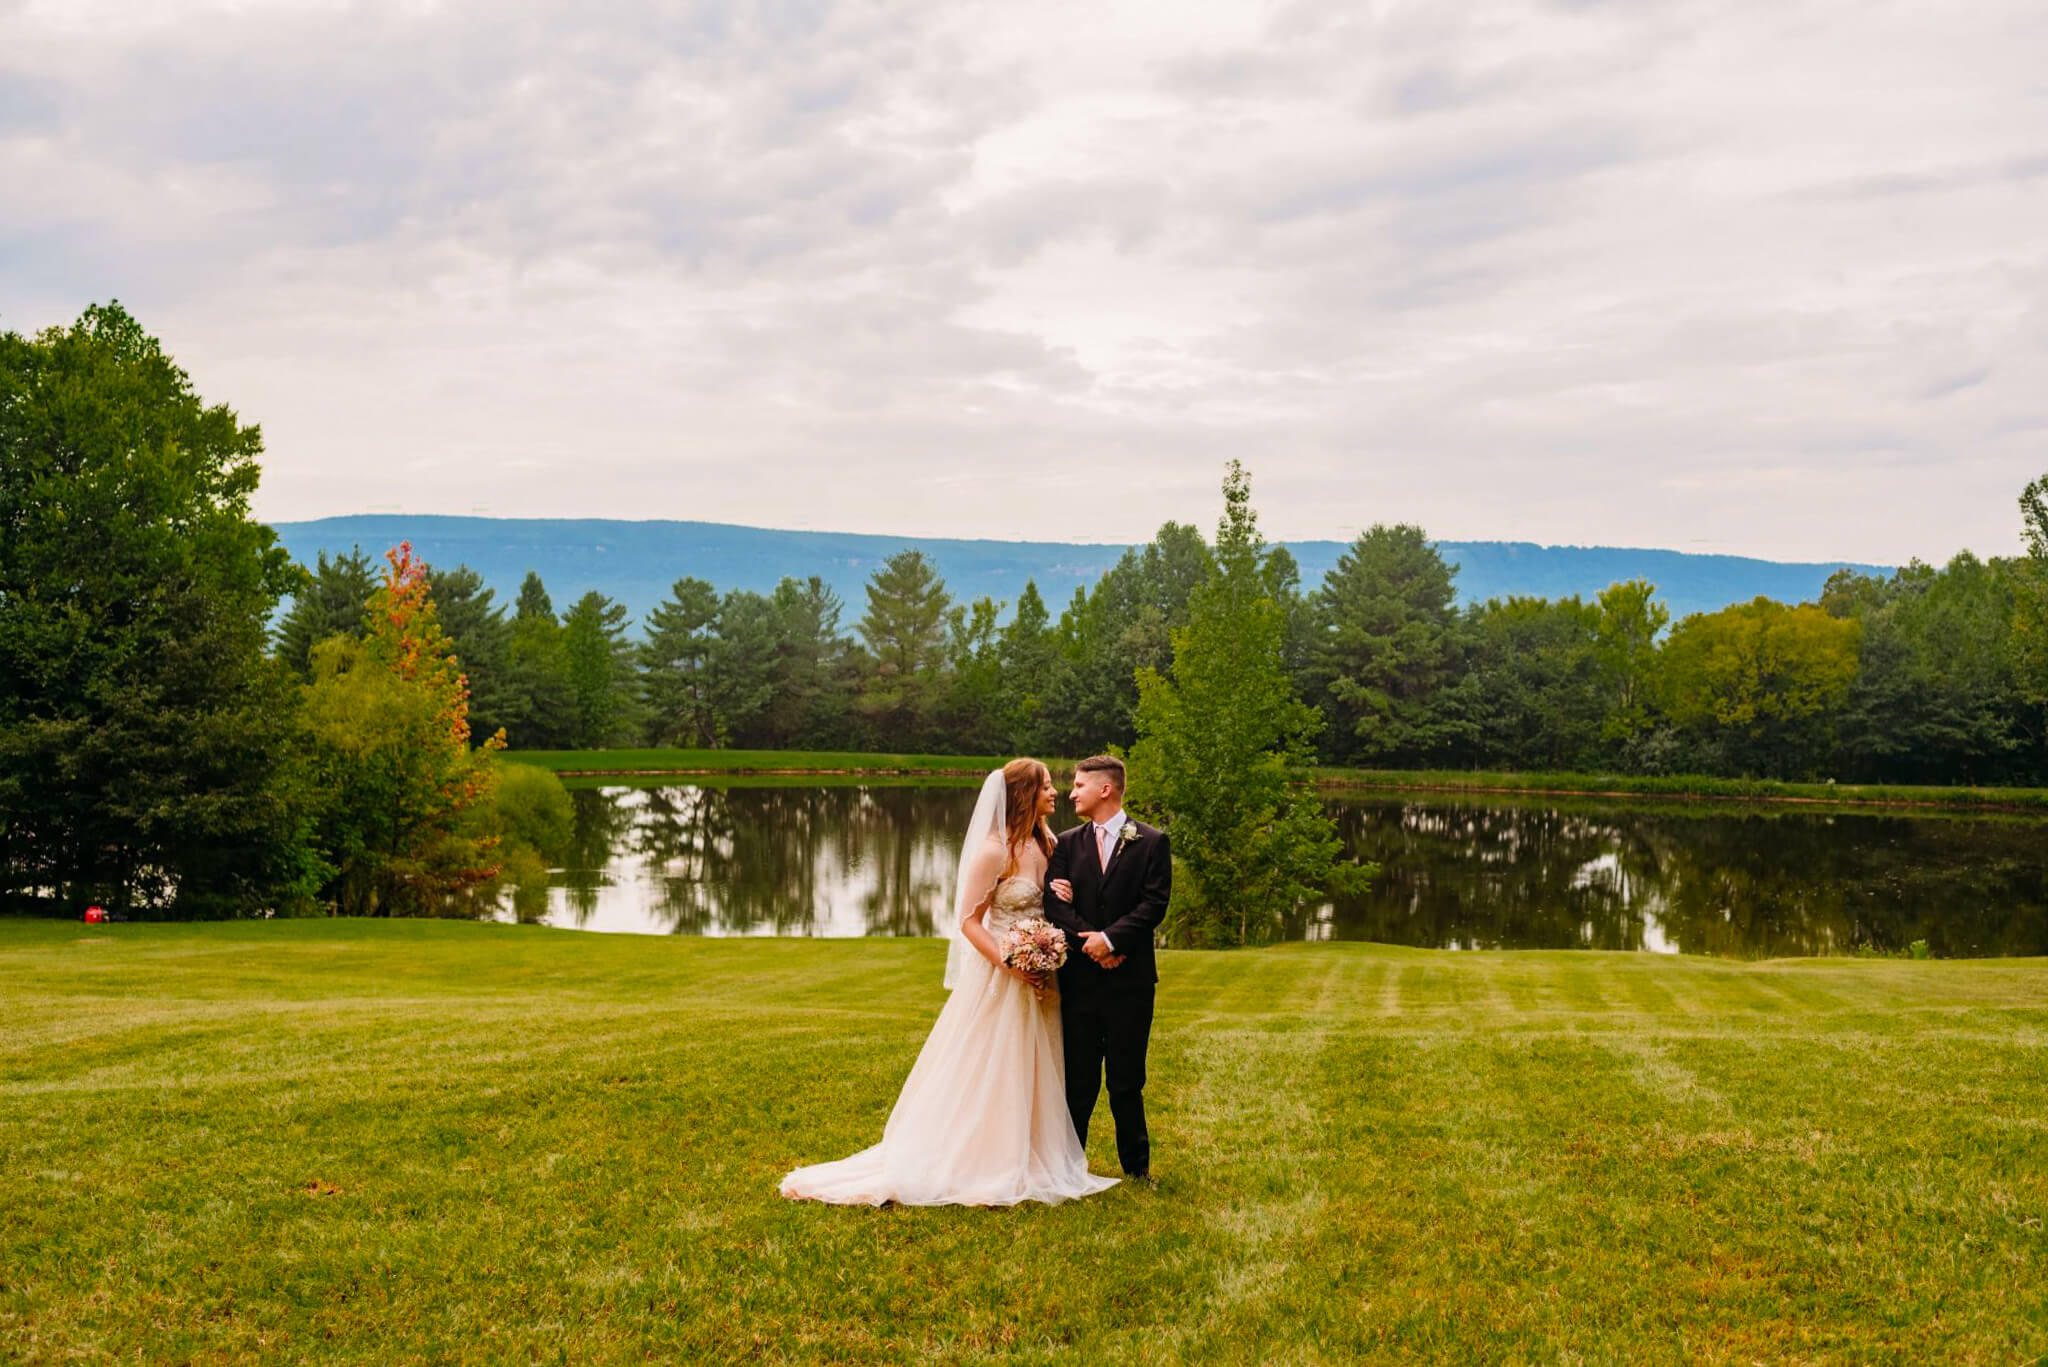 photo of a bride hugging a groom's arm with a pond and mountains in the background